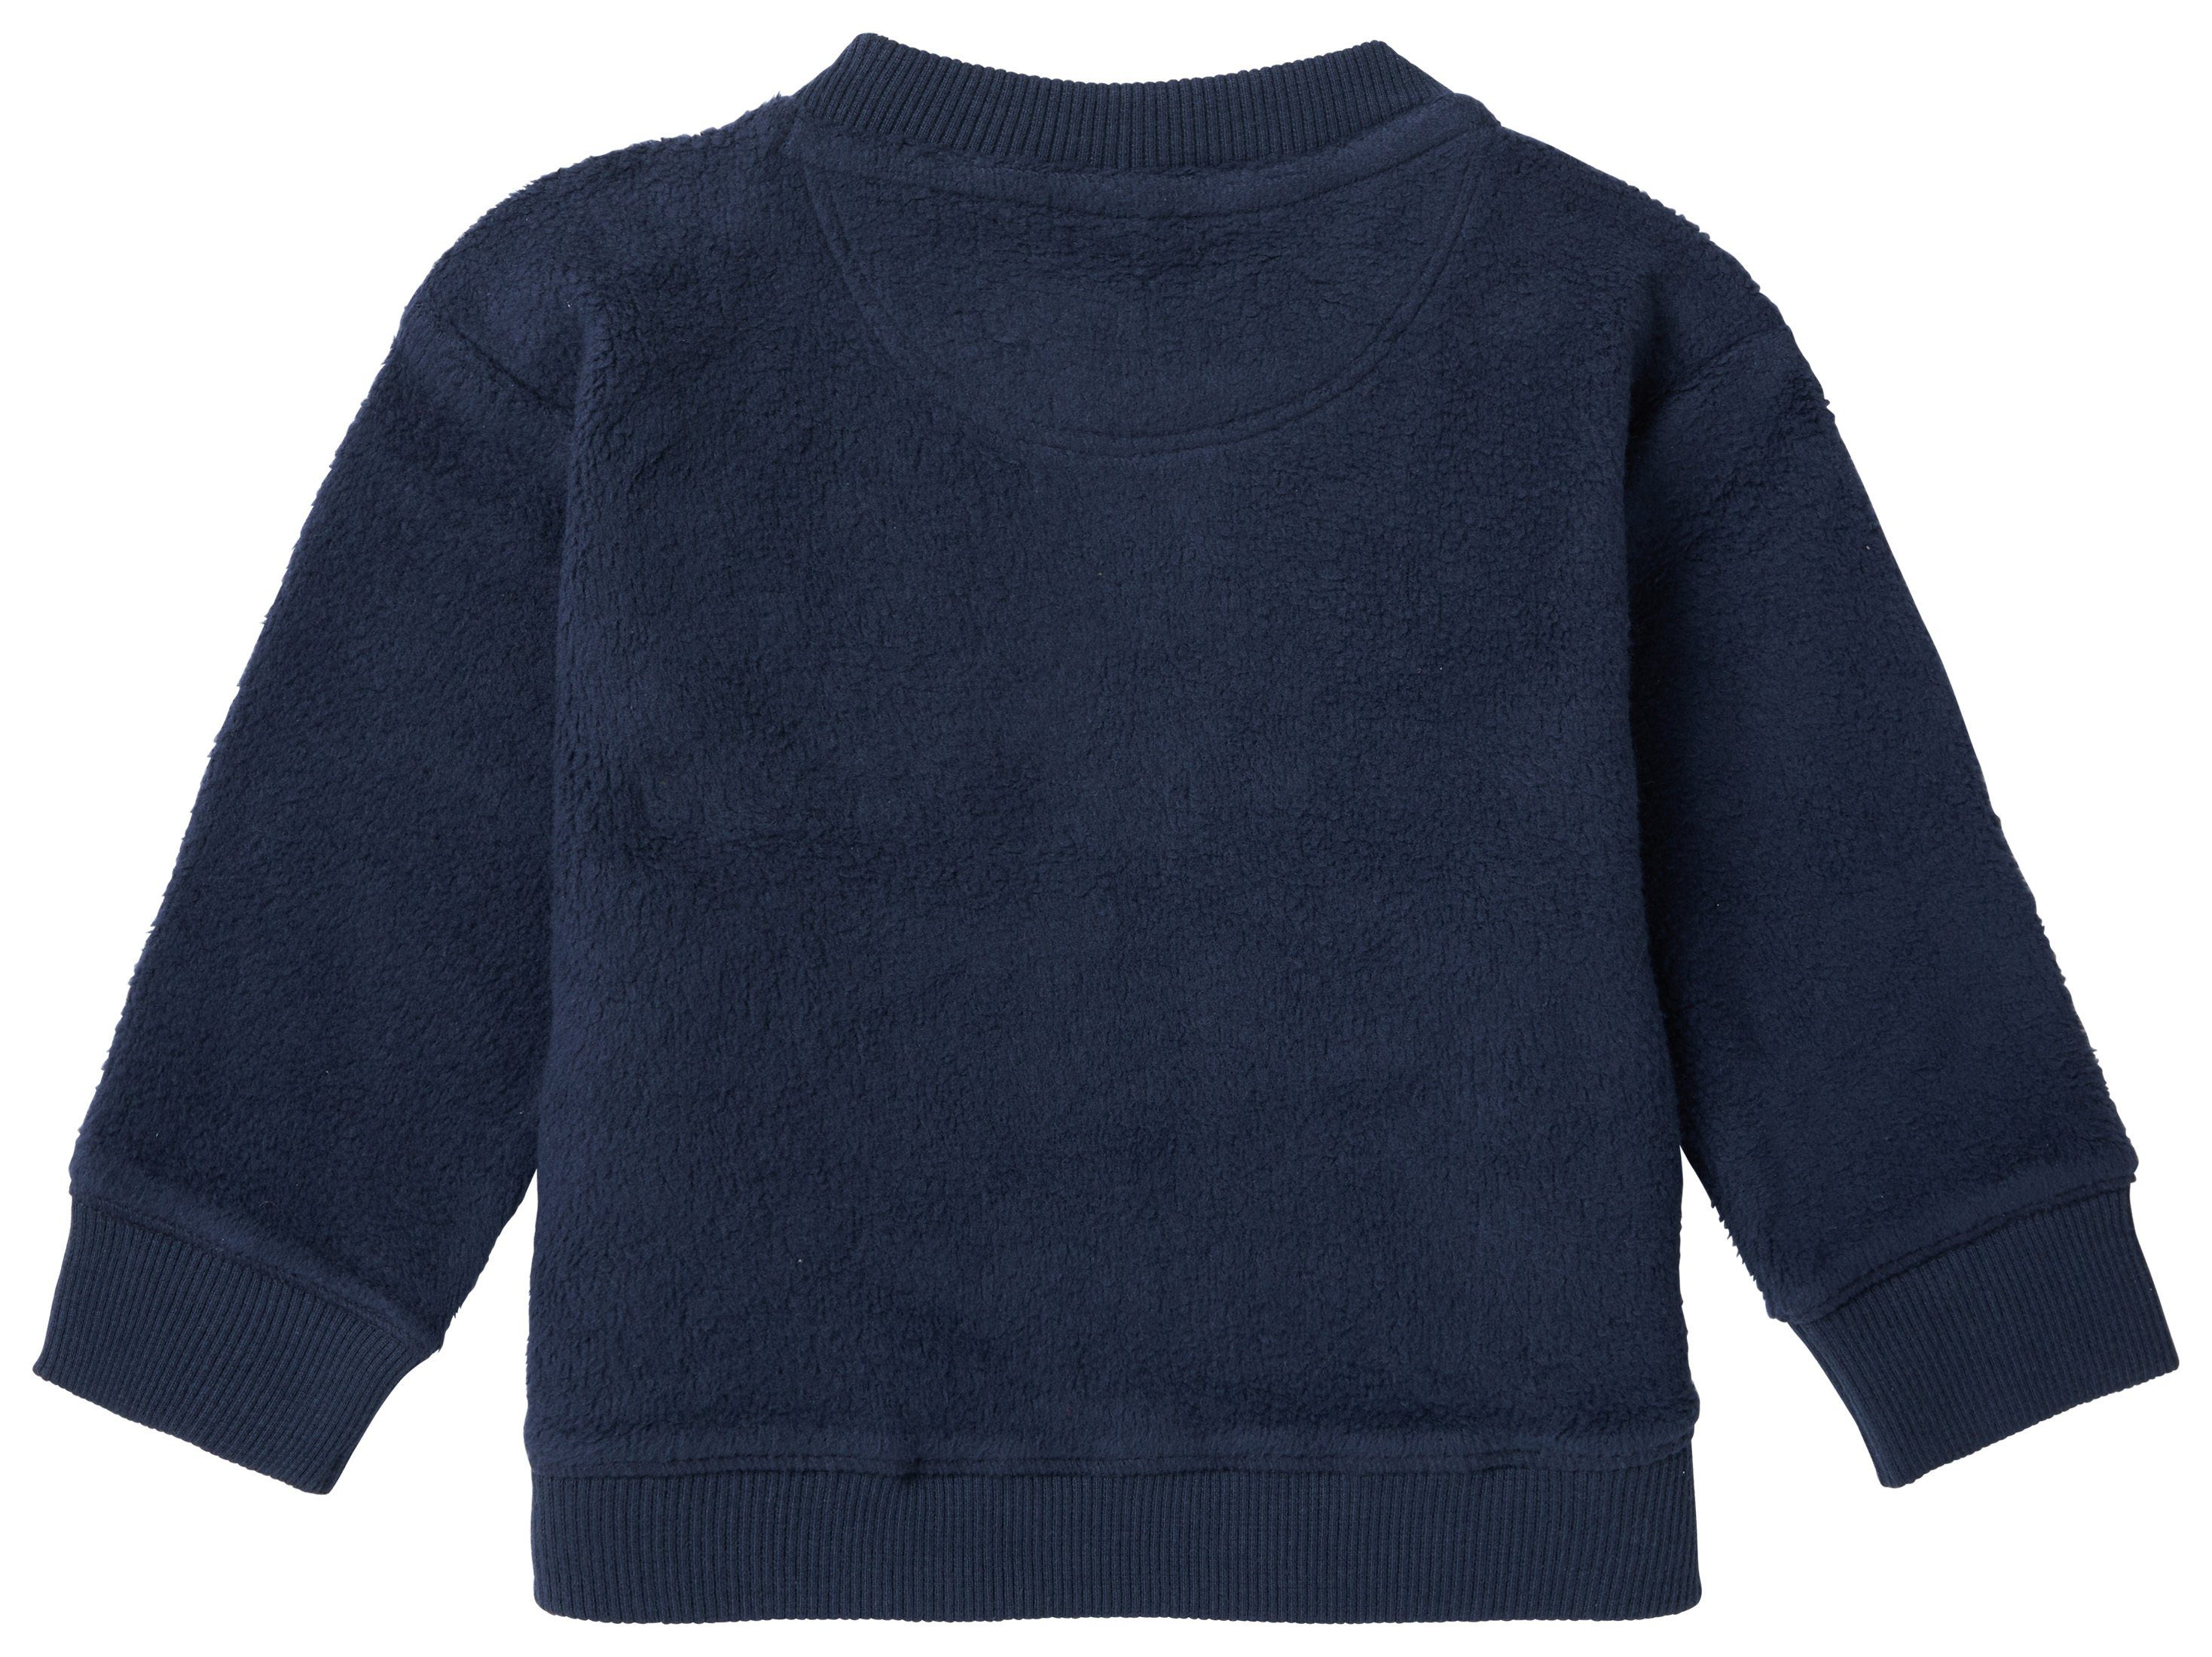 (1-tlg) Troup Noppies Noppies Sweater Pullover